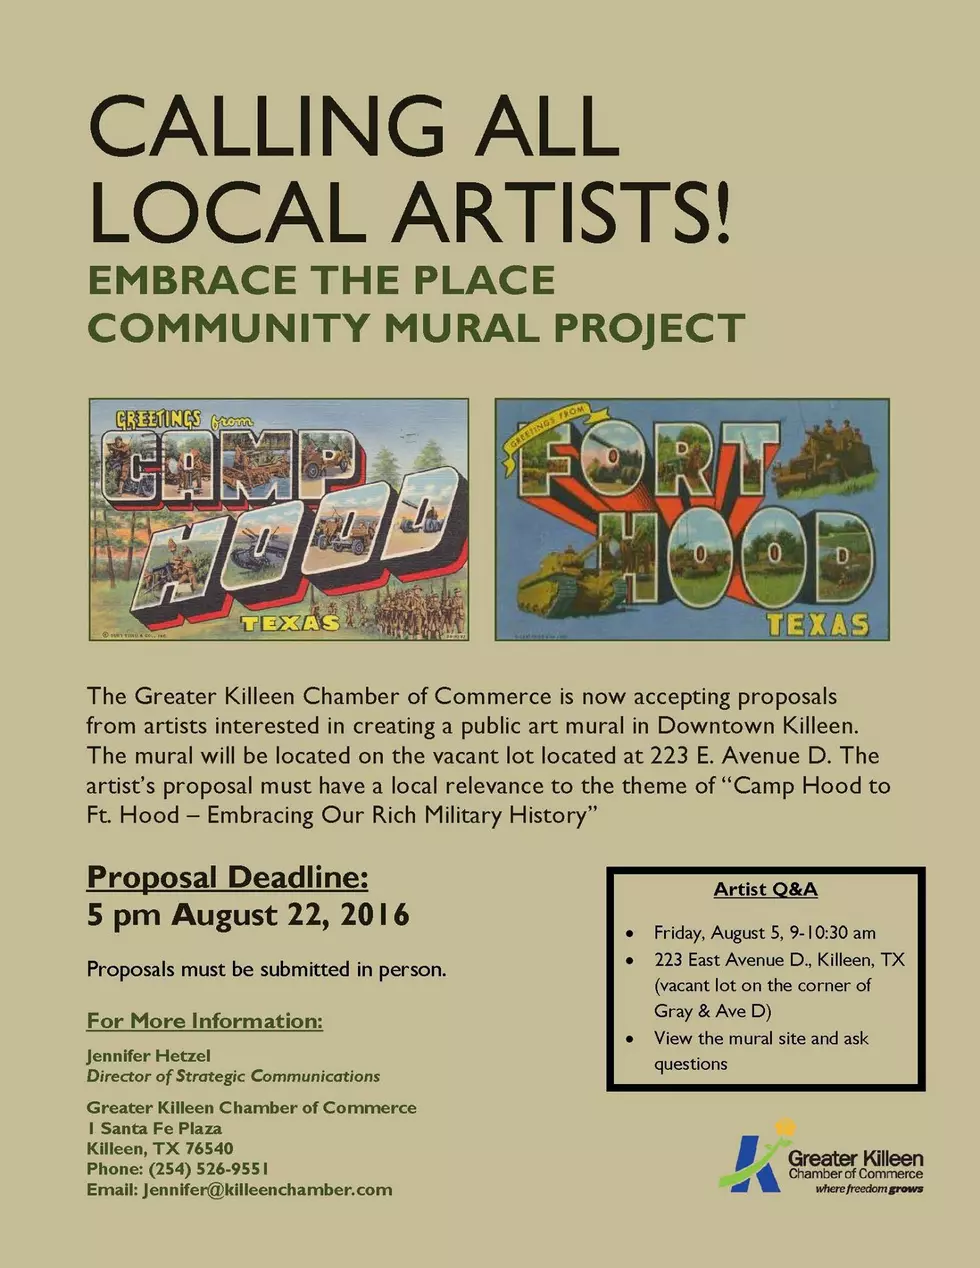 Blank Wall Open for Community Mural in Killeen – All Artists Invited to Propose Ideas